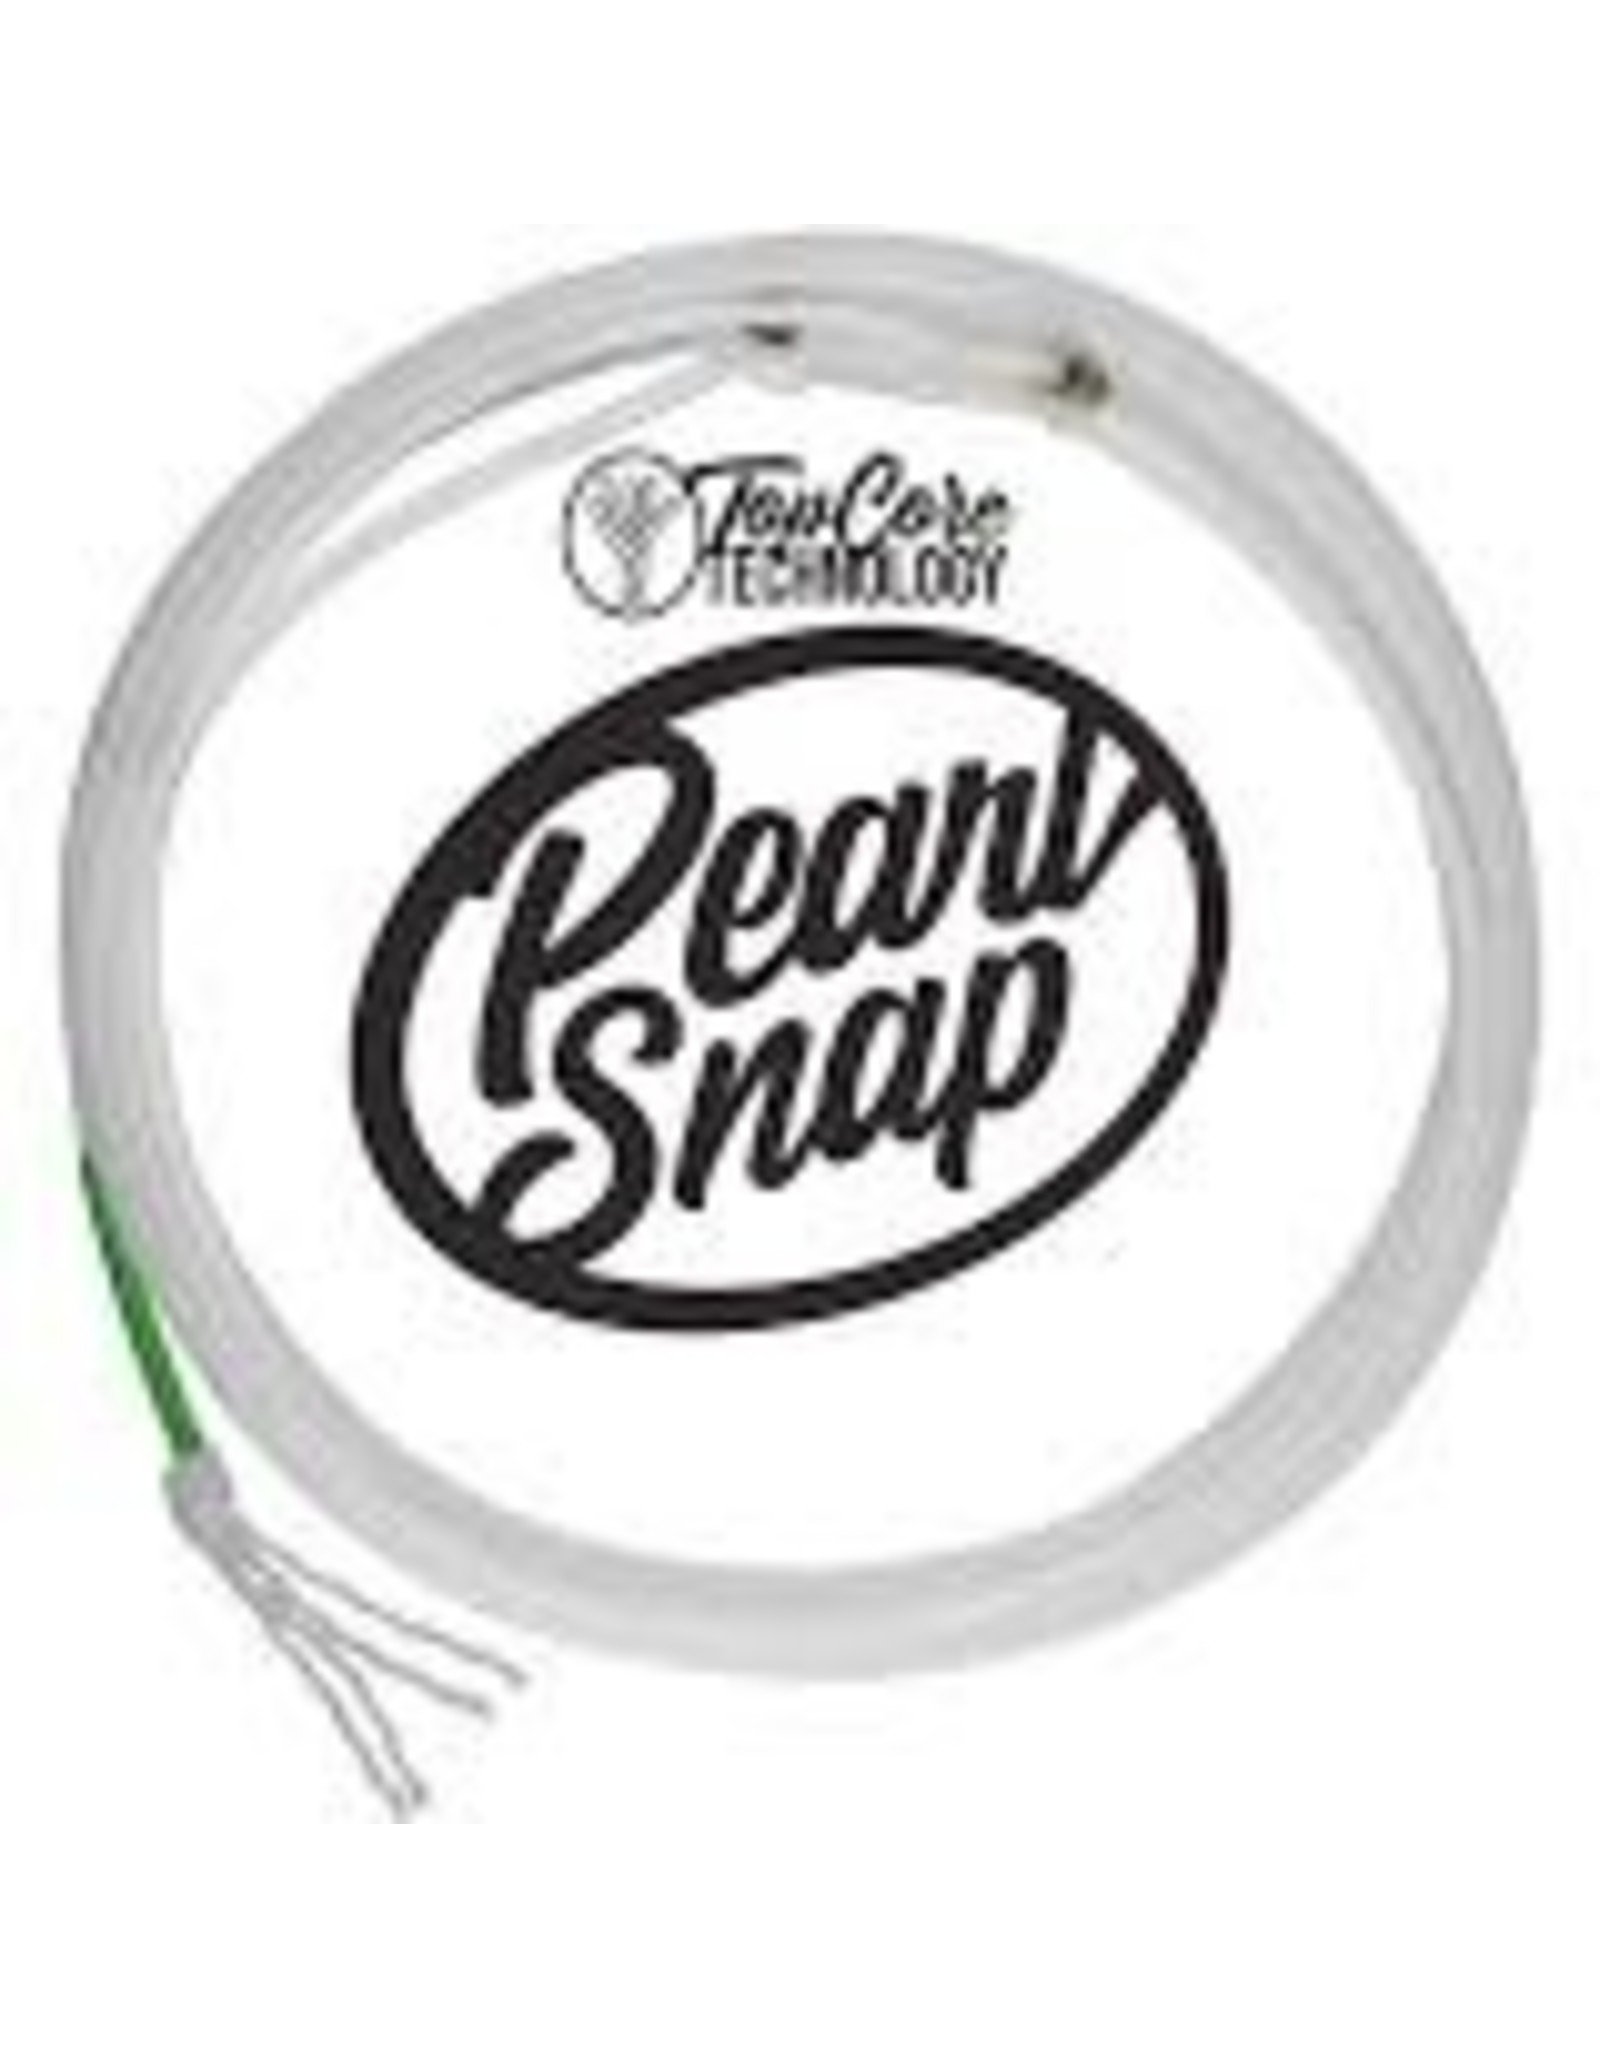 Top Hand Pearl Snap Head Rope XS